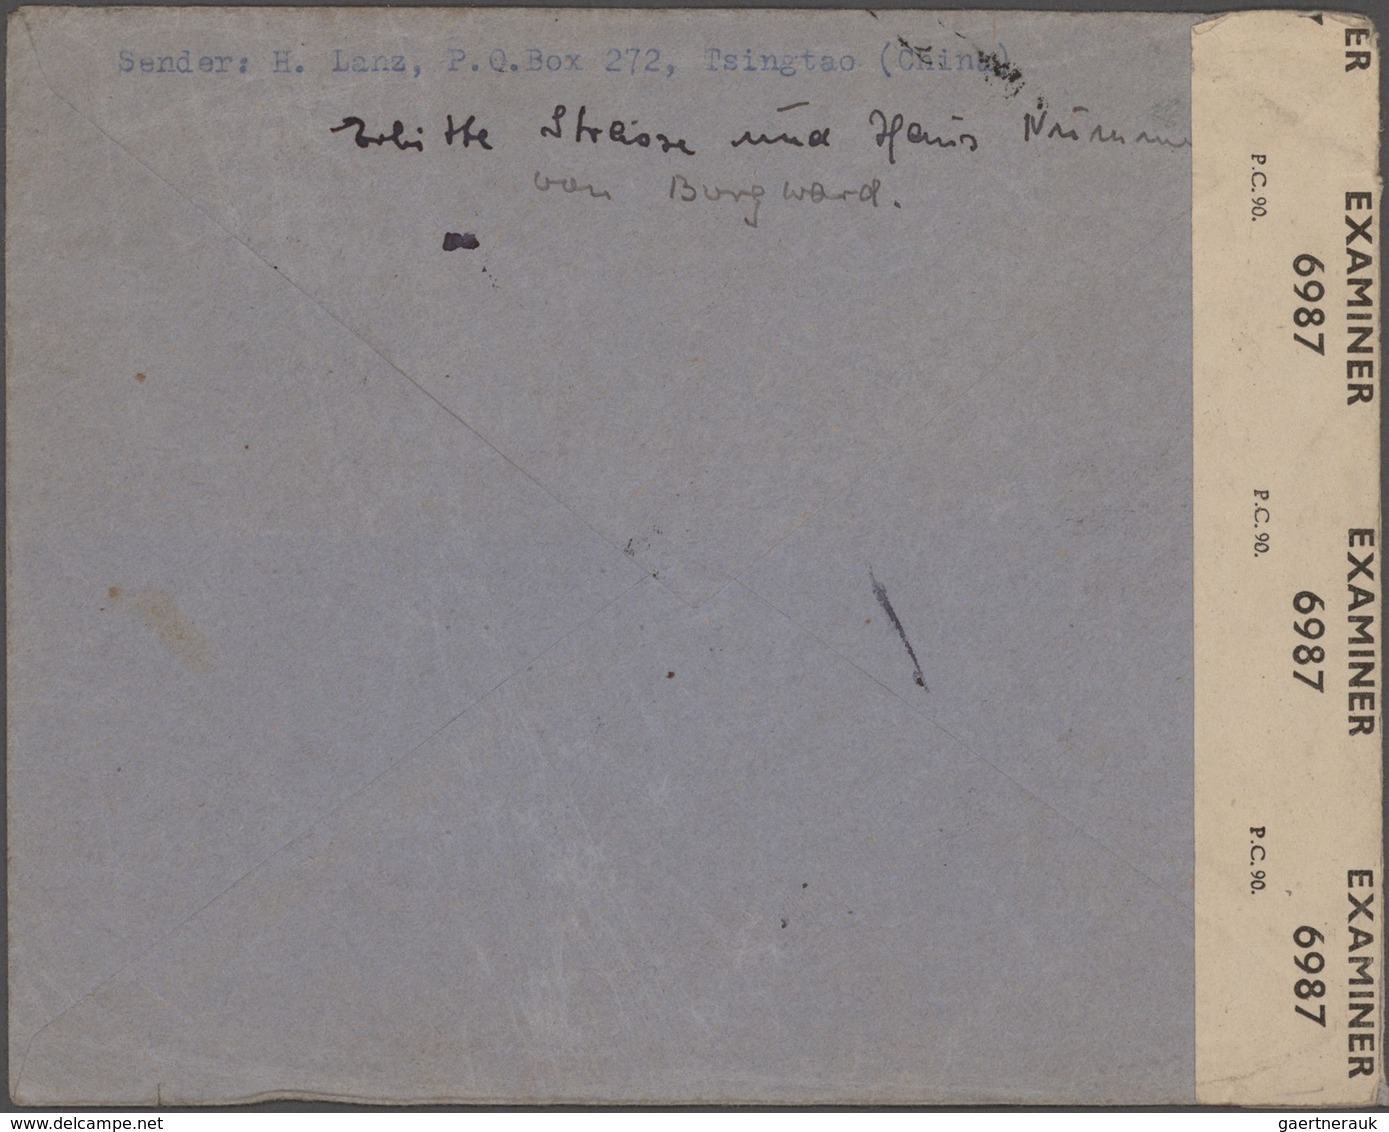 China: 1932/47, covers (6): official cover by air mail from Kwangsi Statistical office to German Con